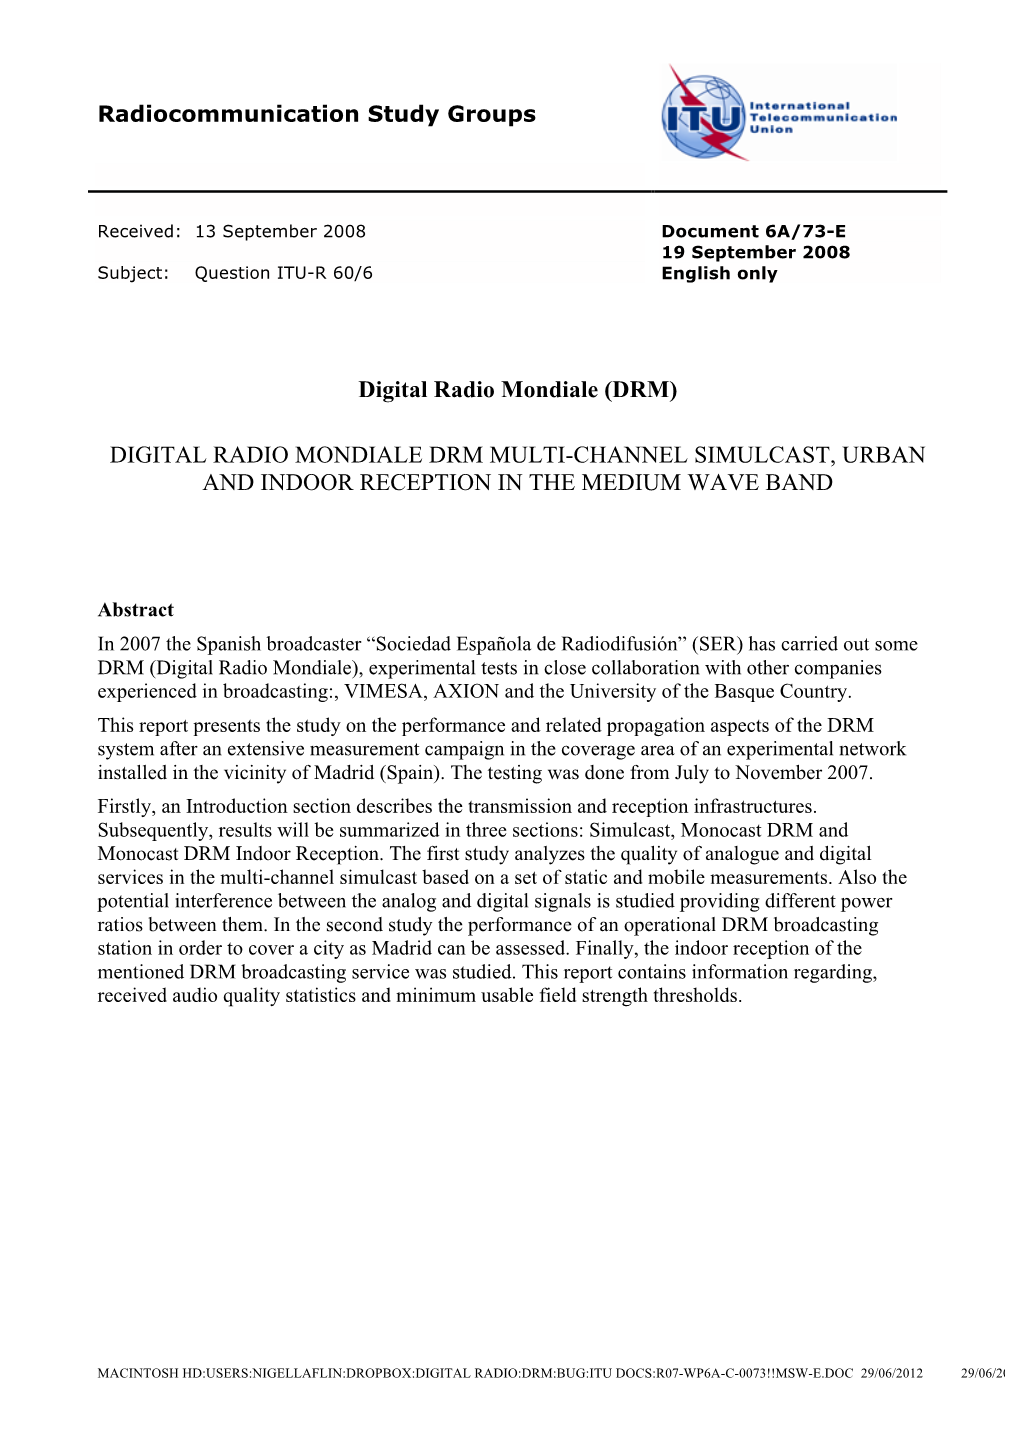 Digital Radio Mondiale Drm Multi-Channel Simulcast, Urban and Indoor Reception in the Medium Wave Band